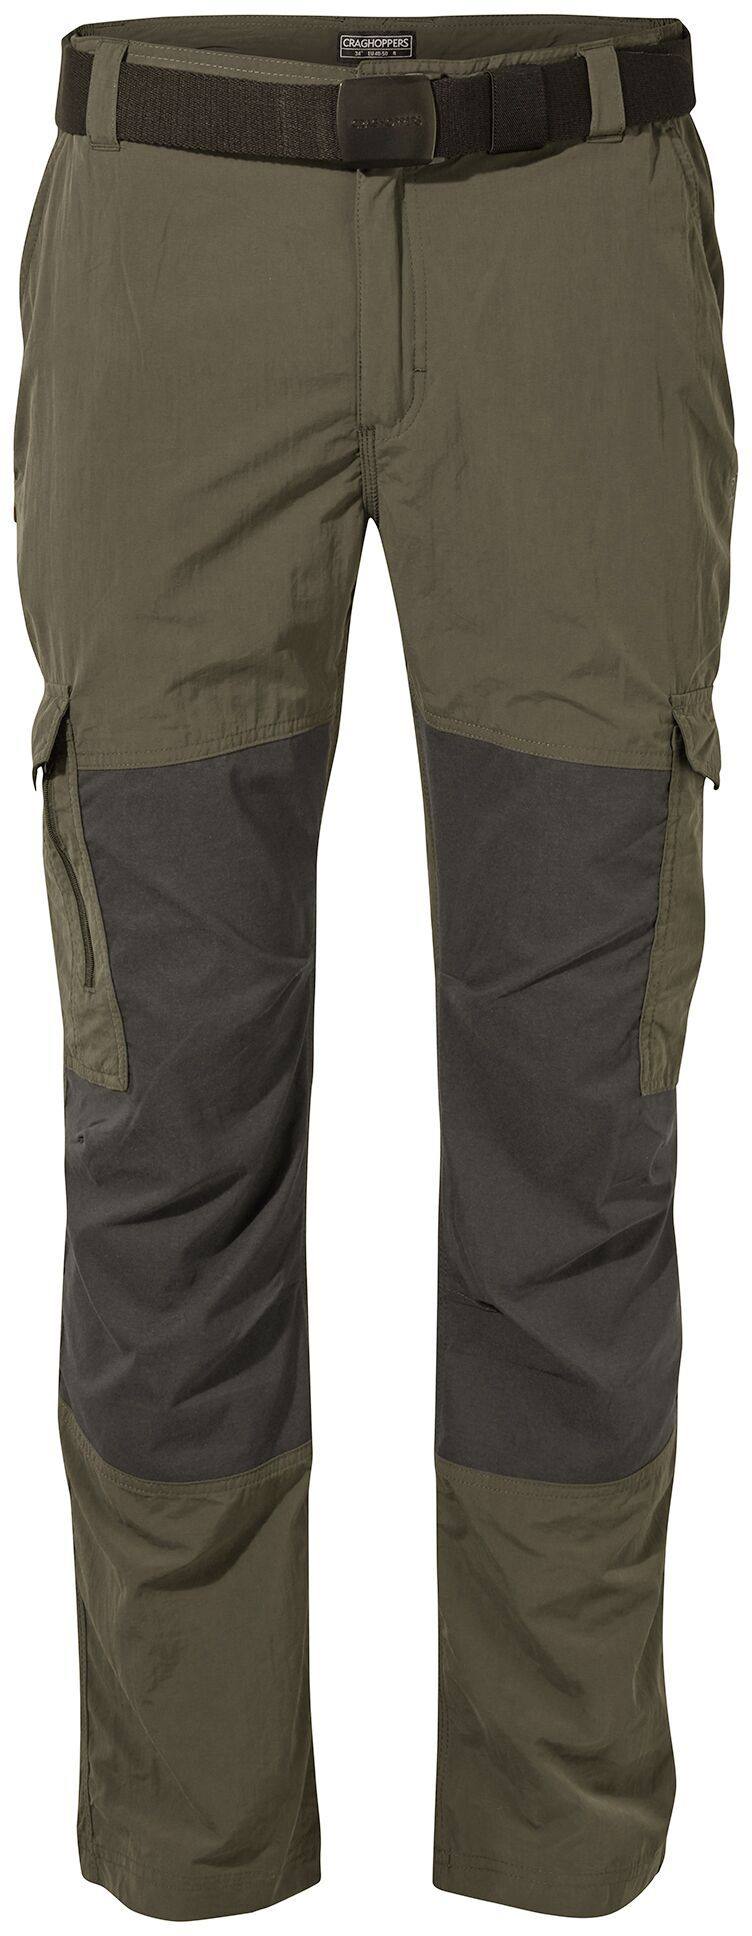 Craghoppers Nosilife Cargo II Trousers